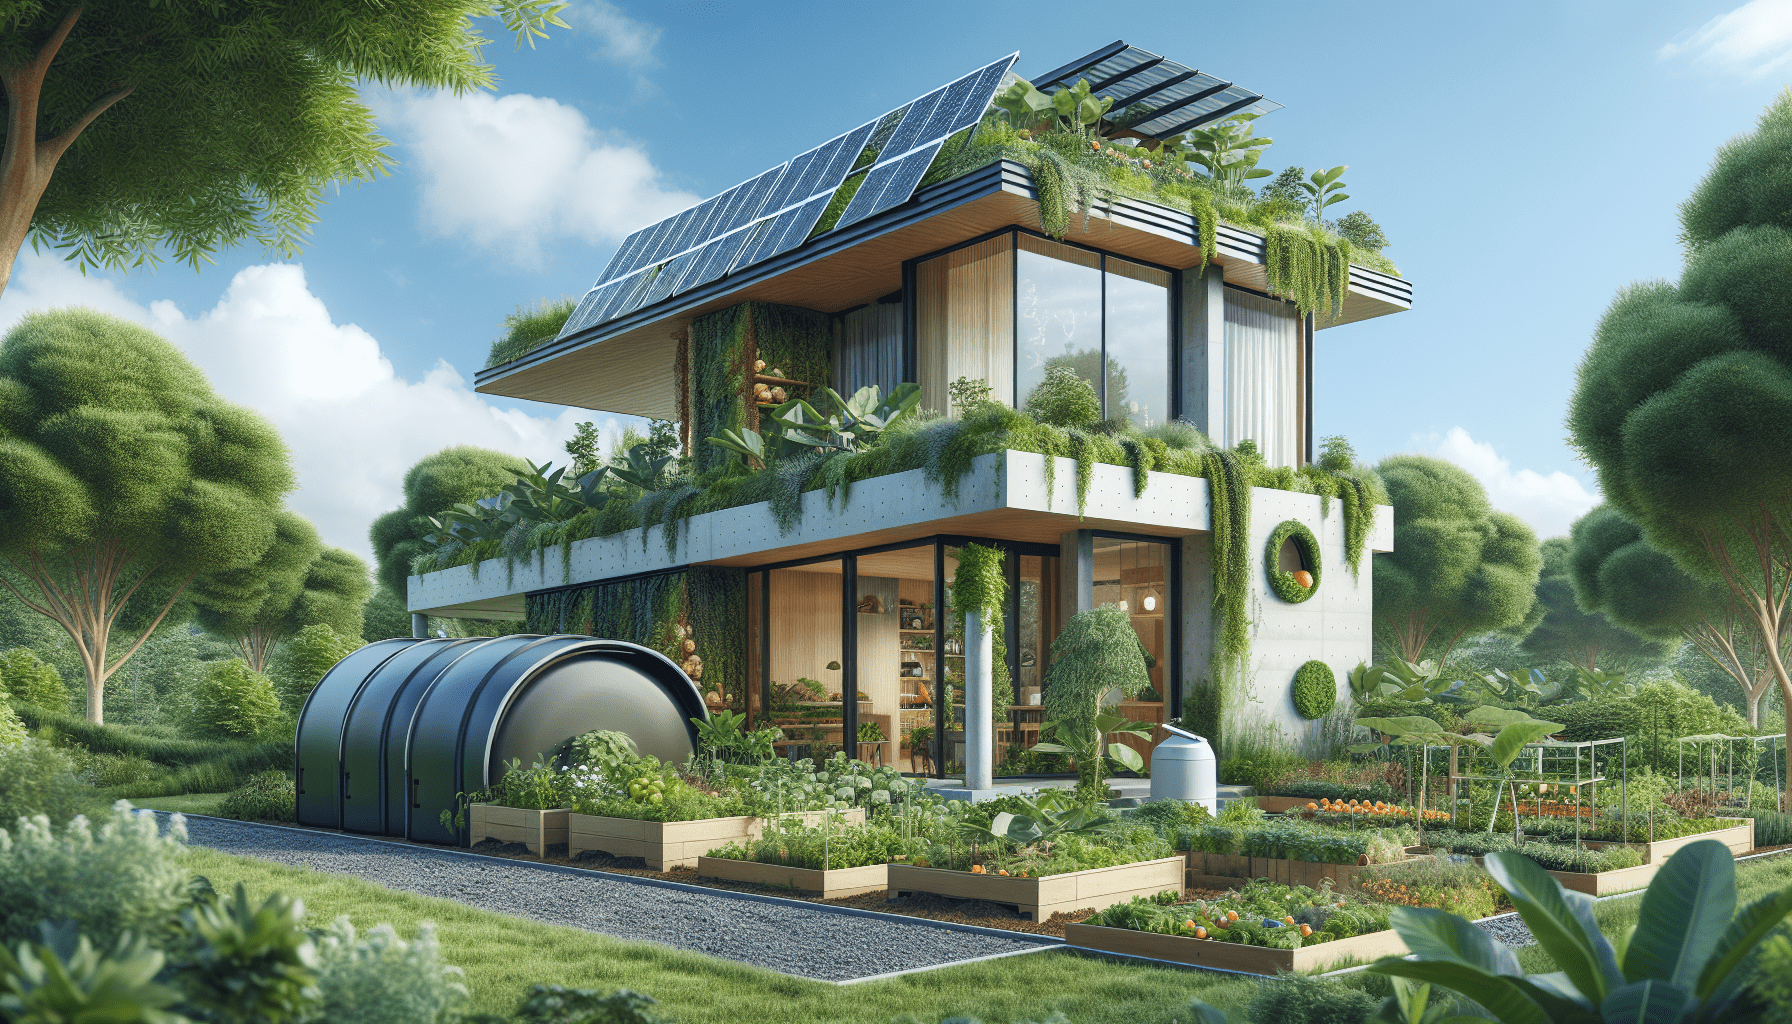 How Can Homes Be Designed Sustainably?